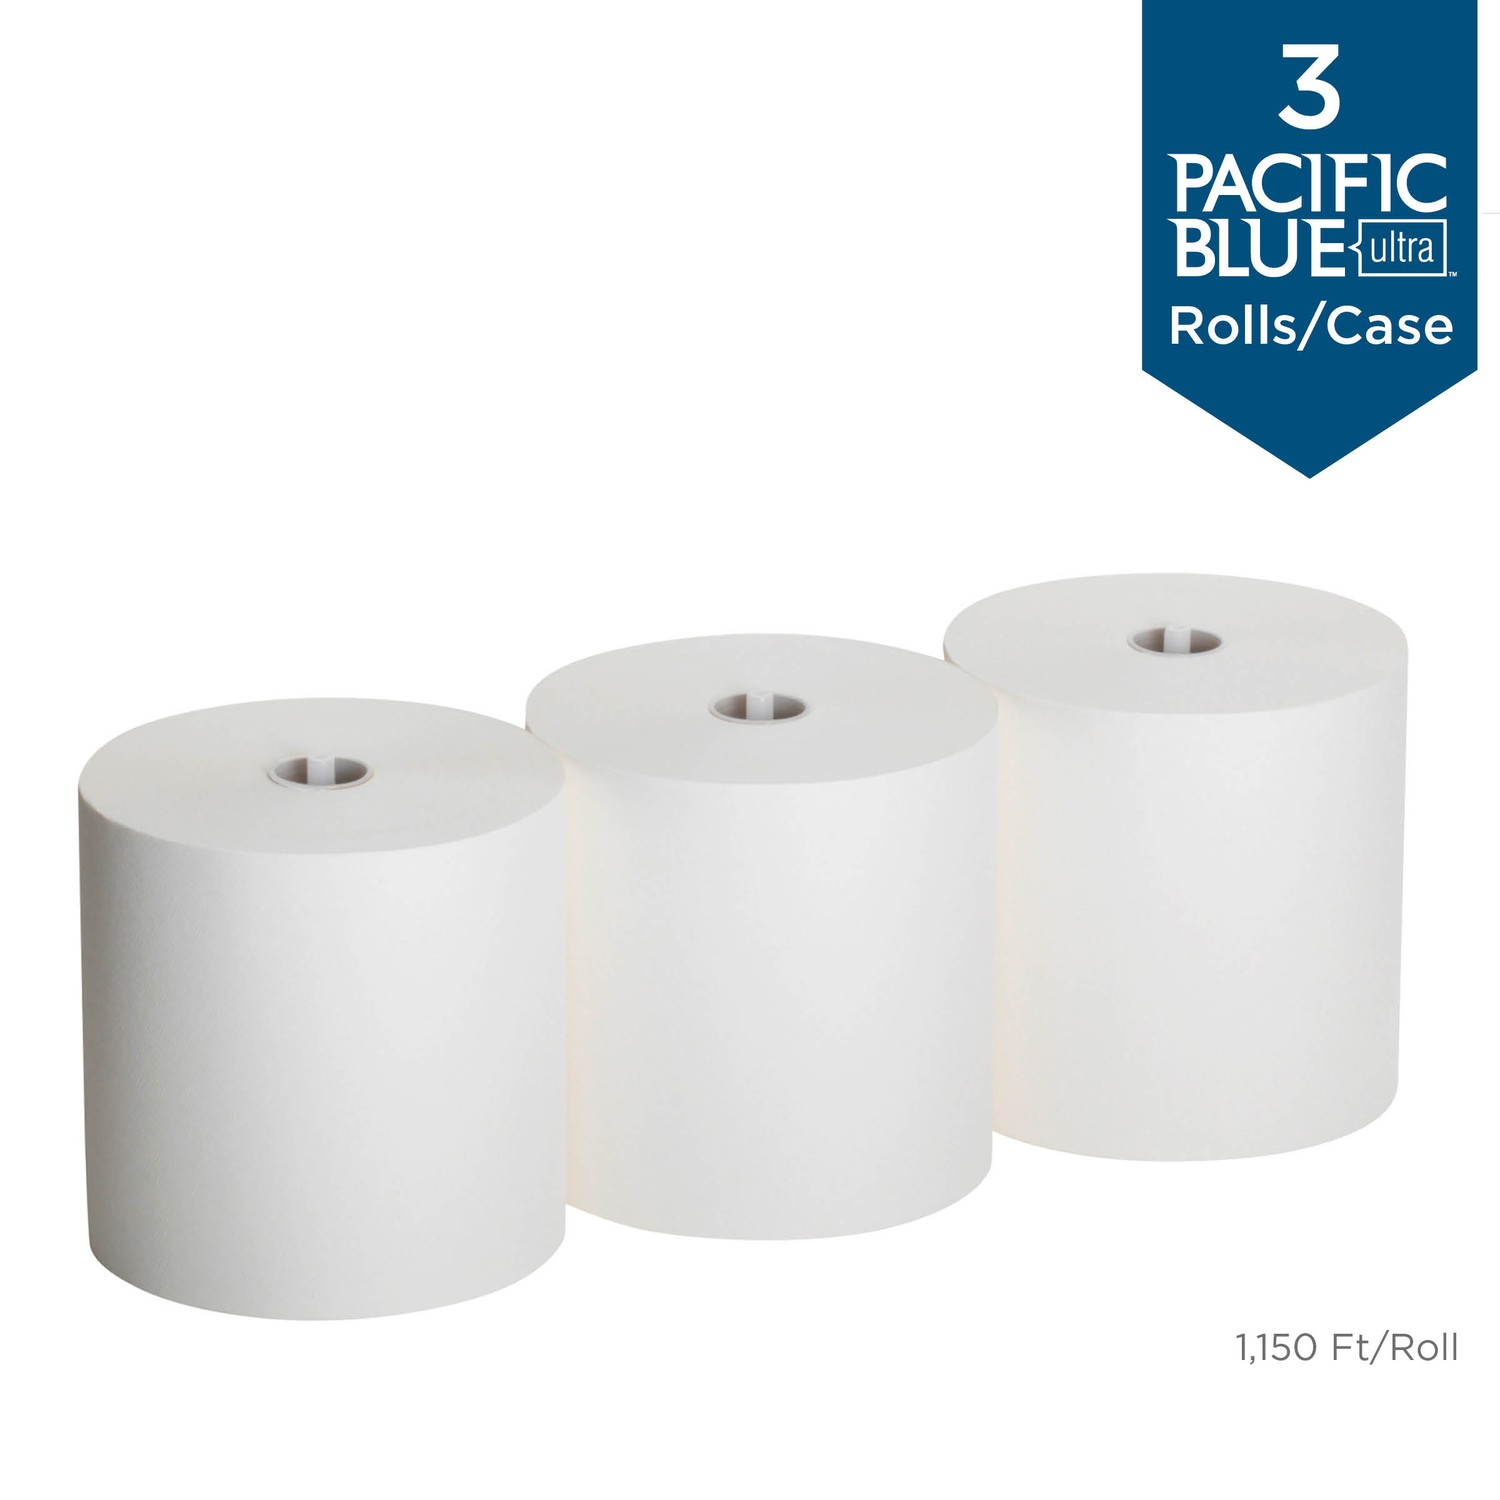 Pacific Blue Ultra High-Capacity Recycled Paper Towel Rolls - 7.87" x 1150 ft - White - Flexible - 3 Rolls Per Carton - 3 / Cart